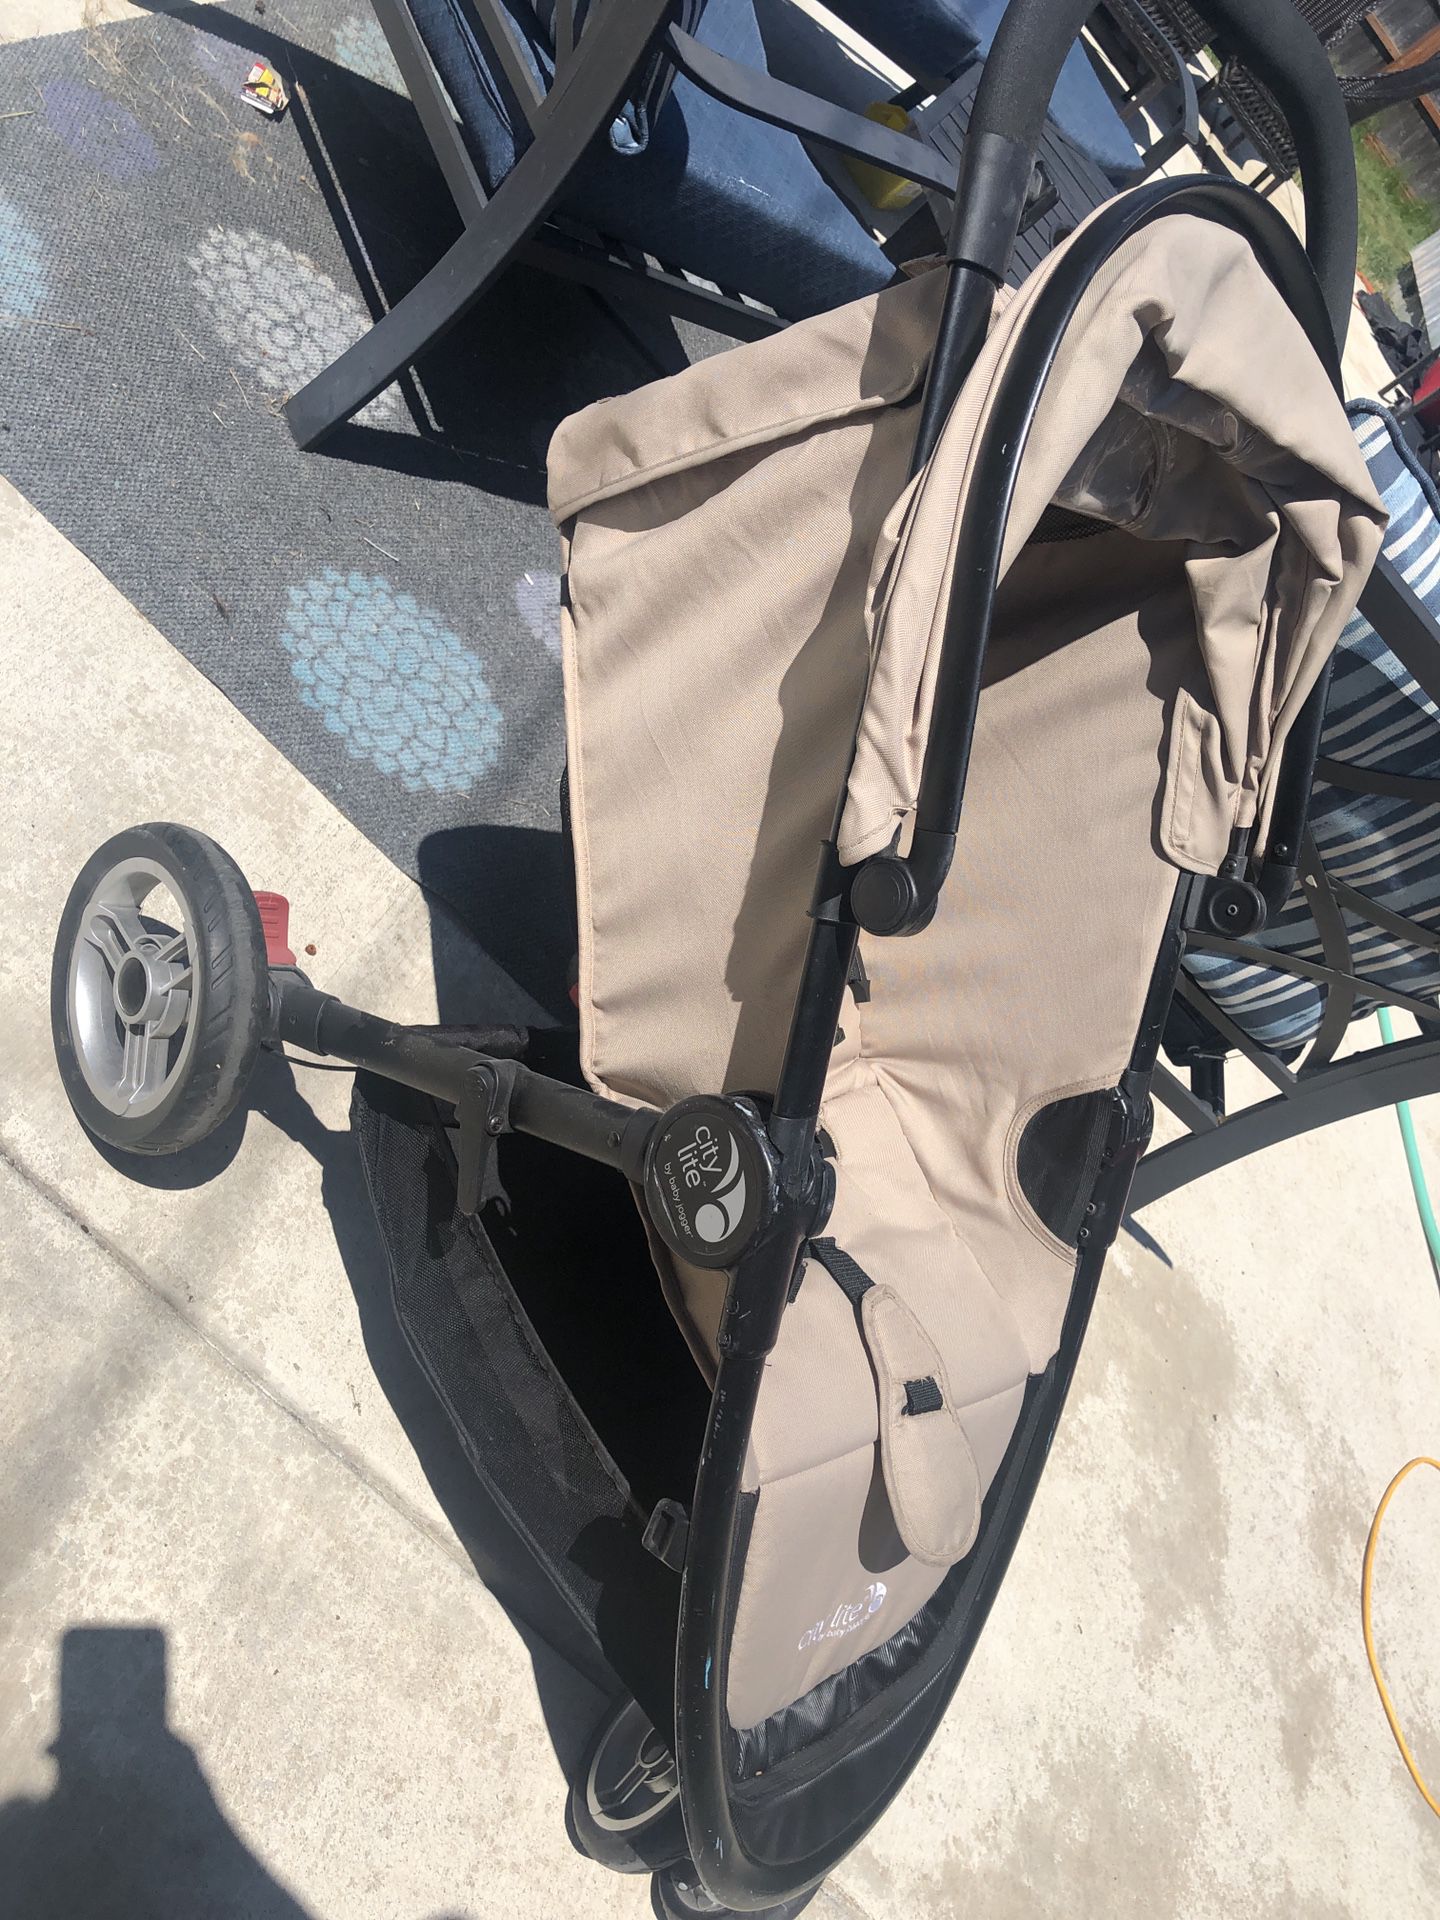 City Lite by Baby Jogger stroller